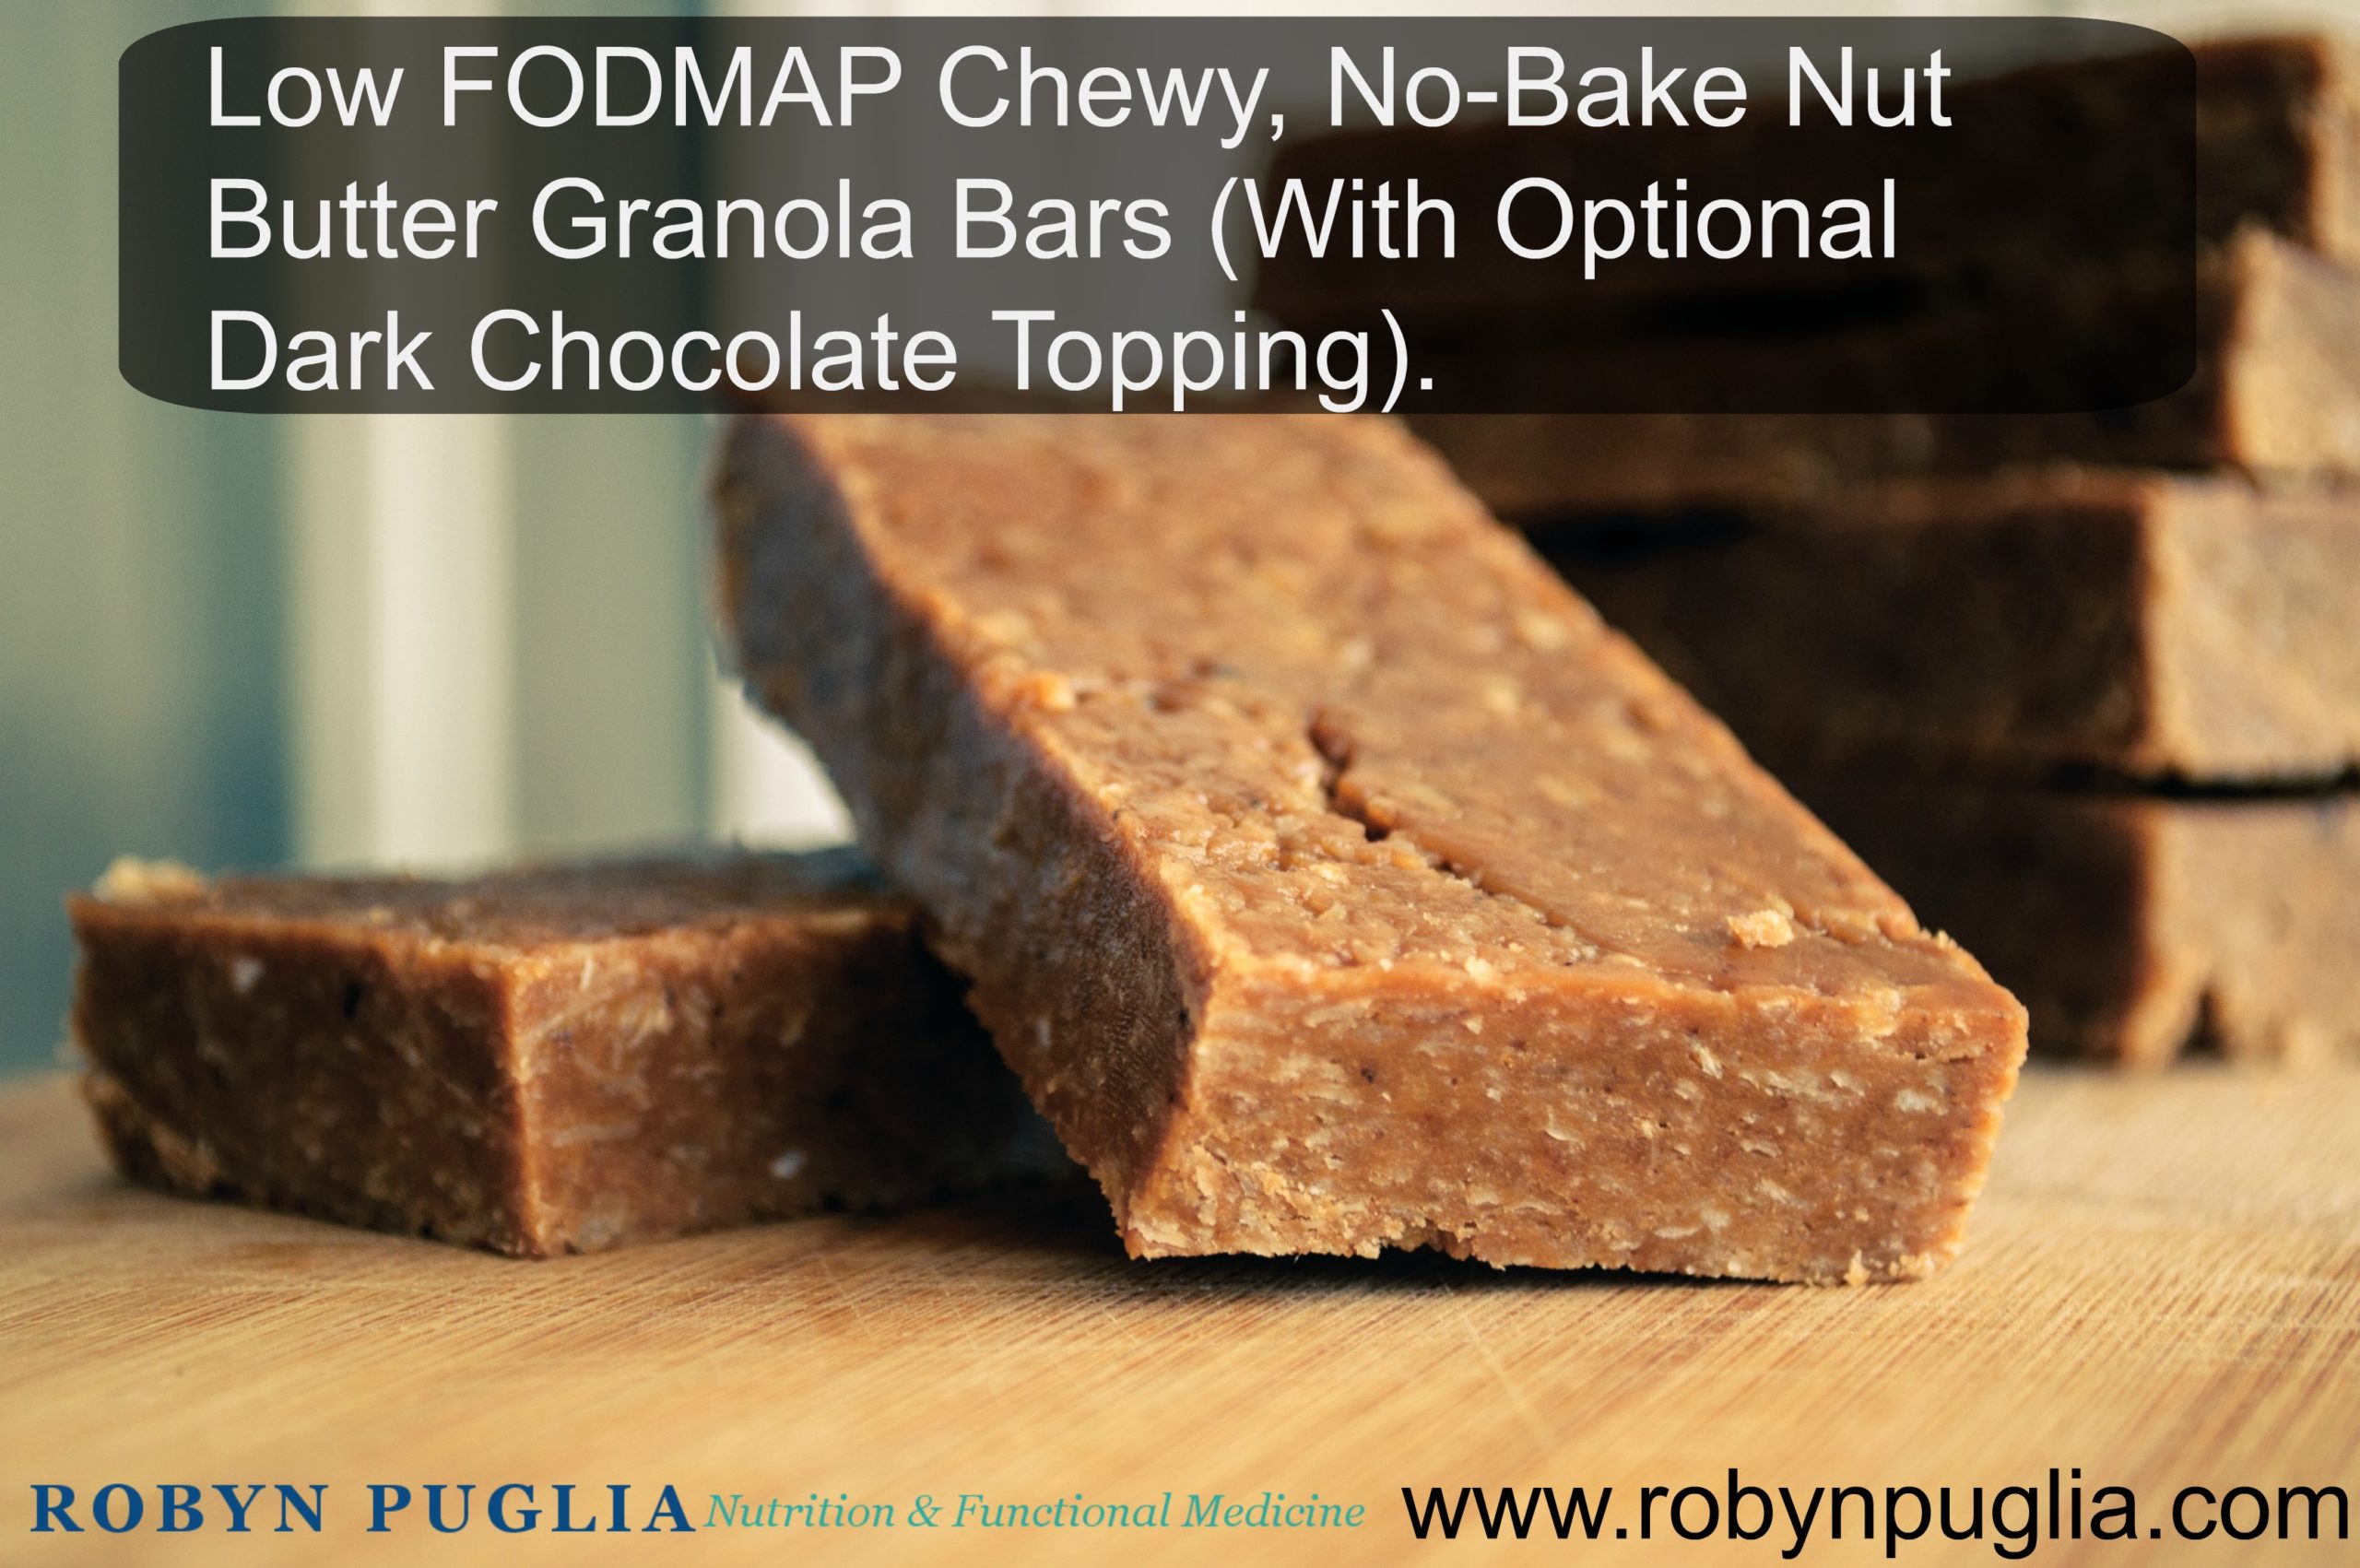 Low FODMAP Chewy, No-Bake Nut Butter Granola Bars (with optional dark chocolate topping).